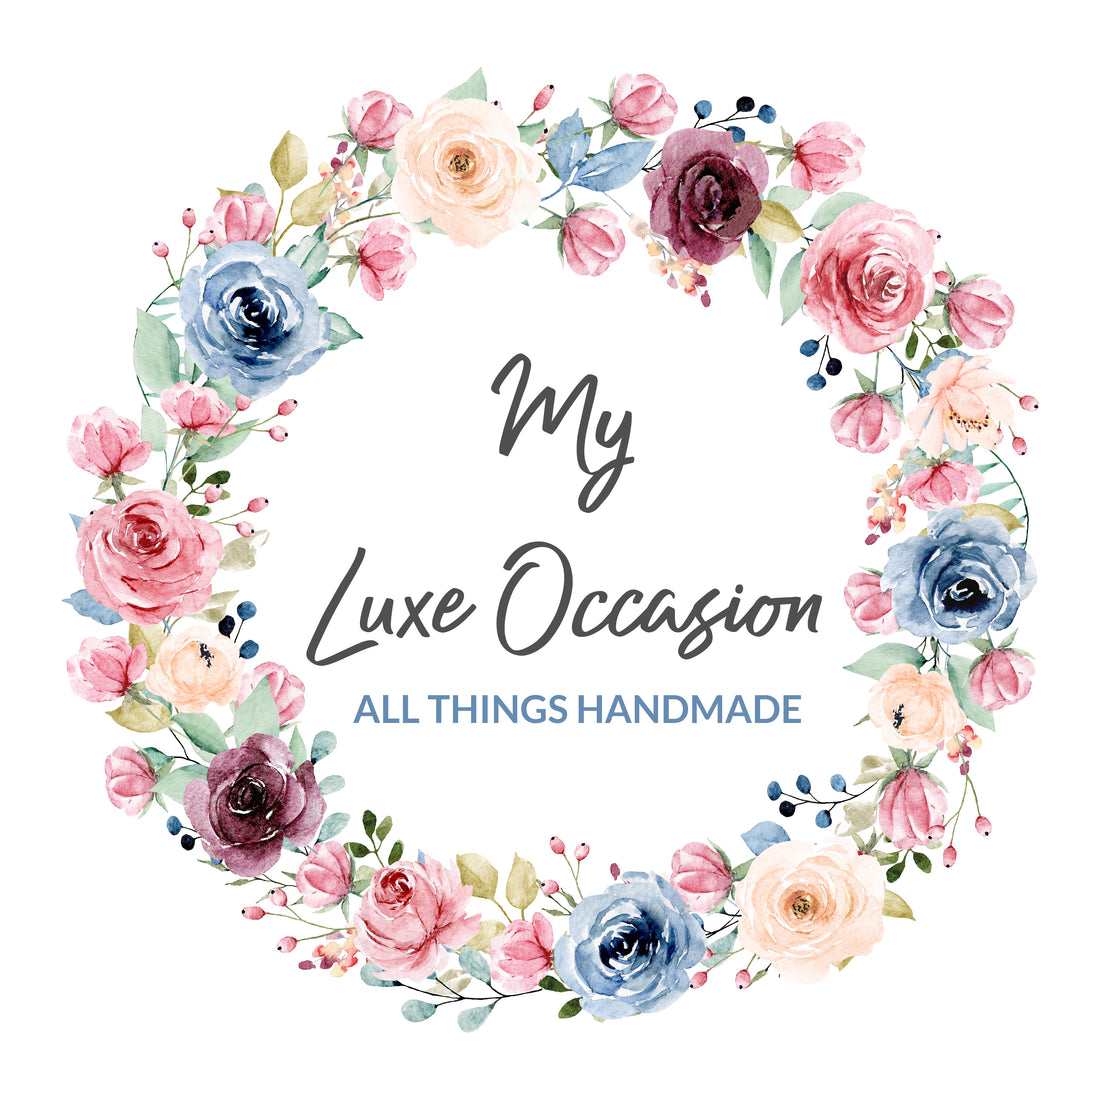 MyLuxeOccasion logo featuring a floral wreath surrounding the word My Luxe Occasion all things handmade